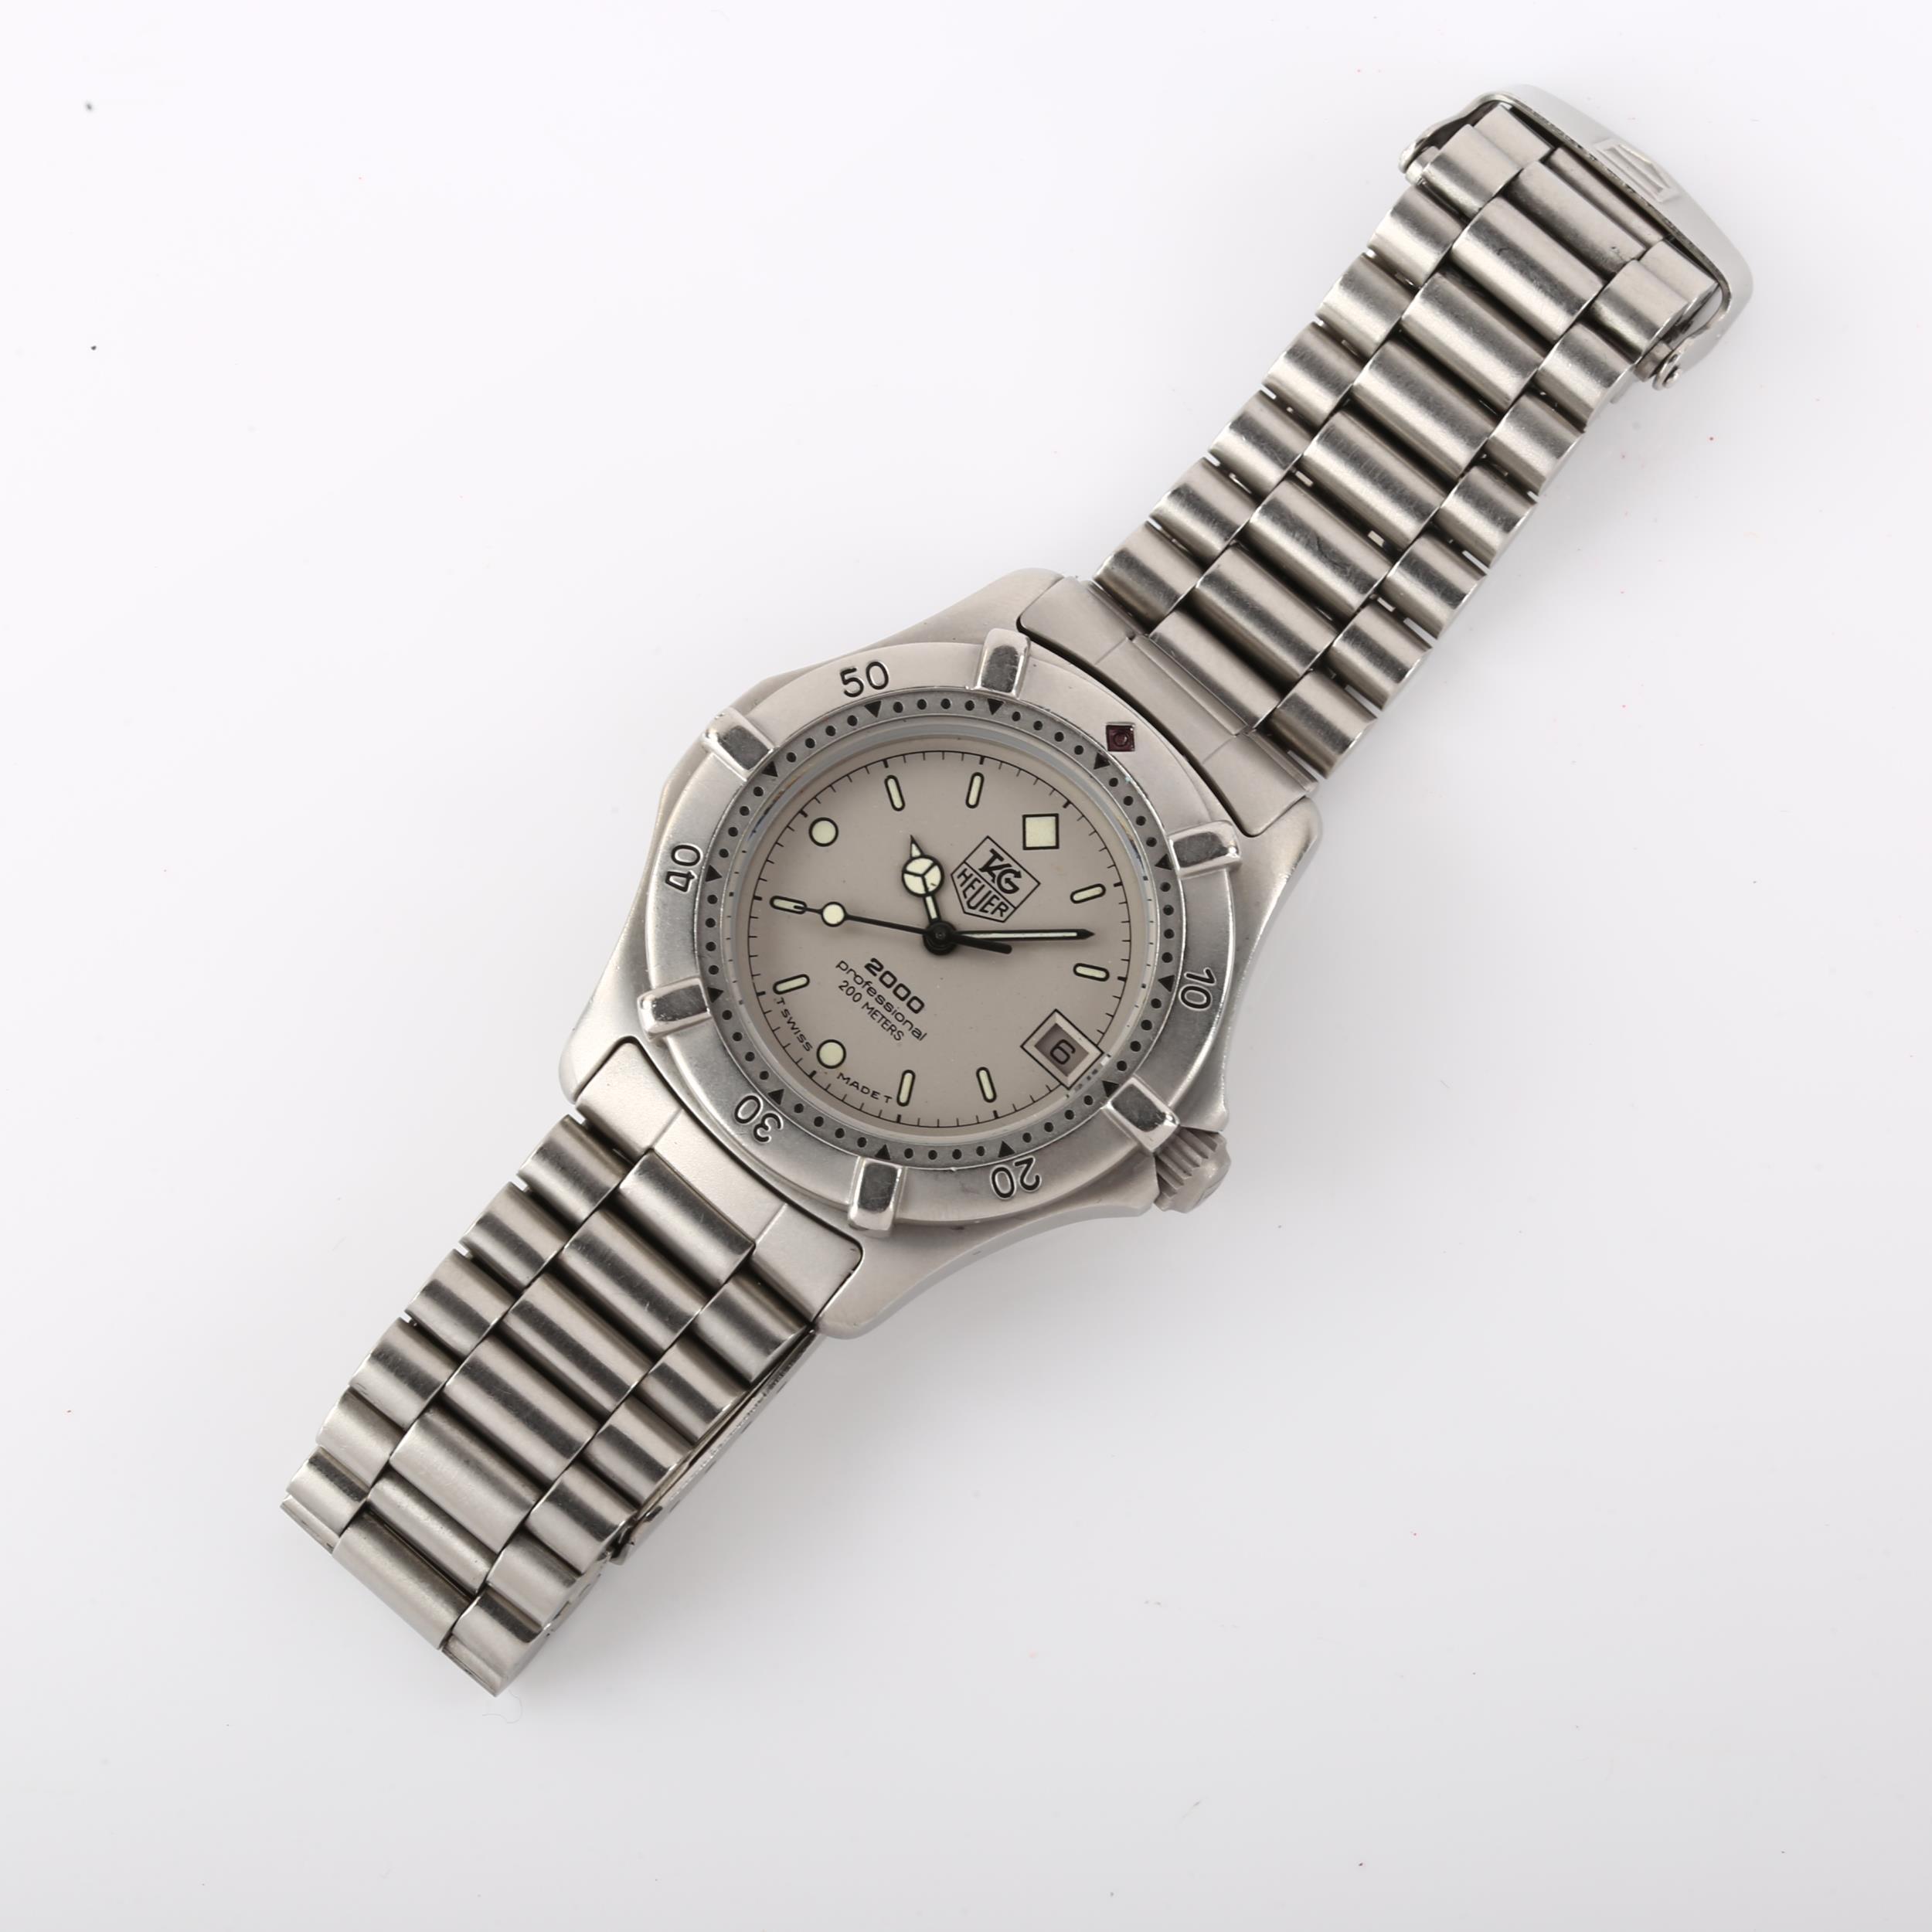 TAG HEUER - a mid-size stainless steel 2000 Series Professional quartz bracelet watch, ref. 962.213, - Image 2 of 4